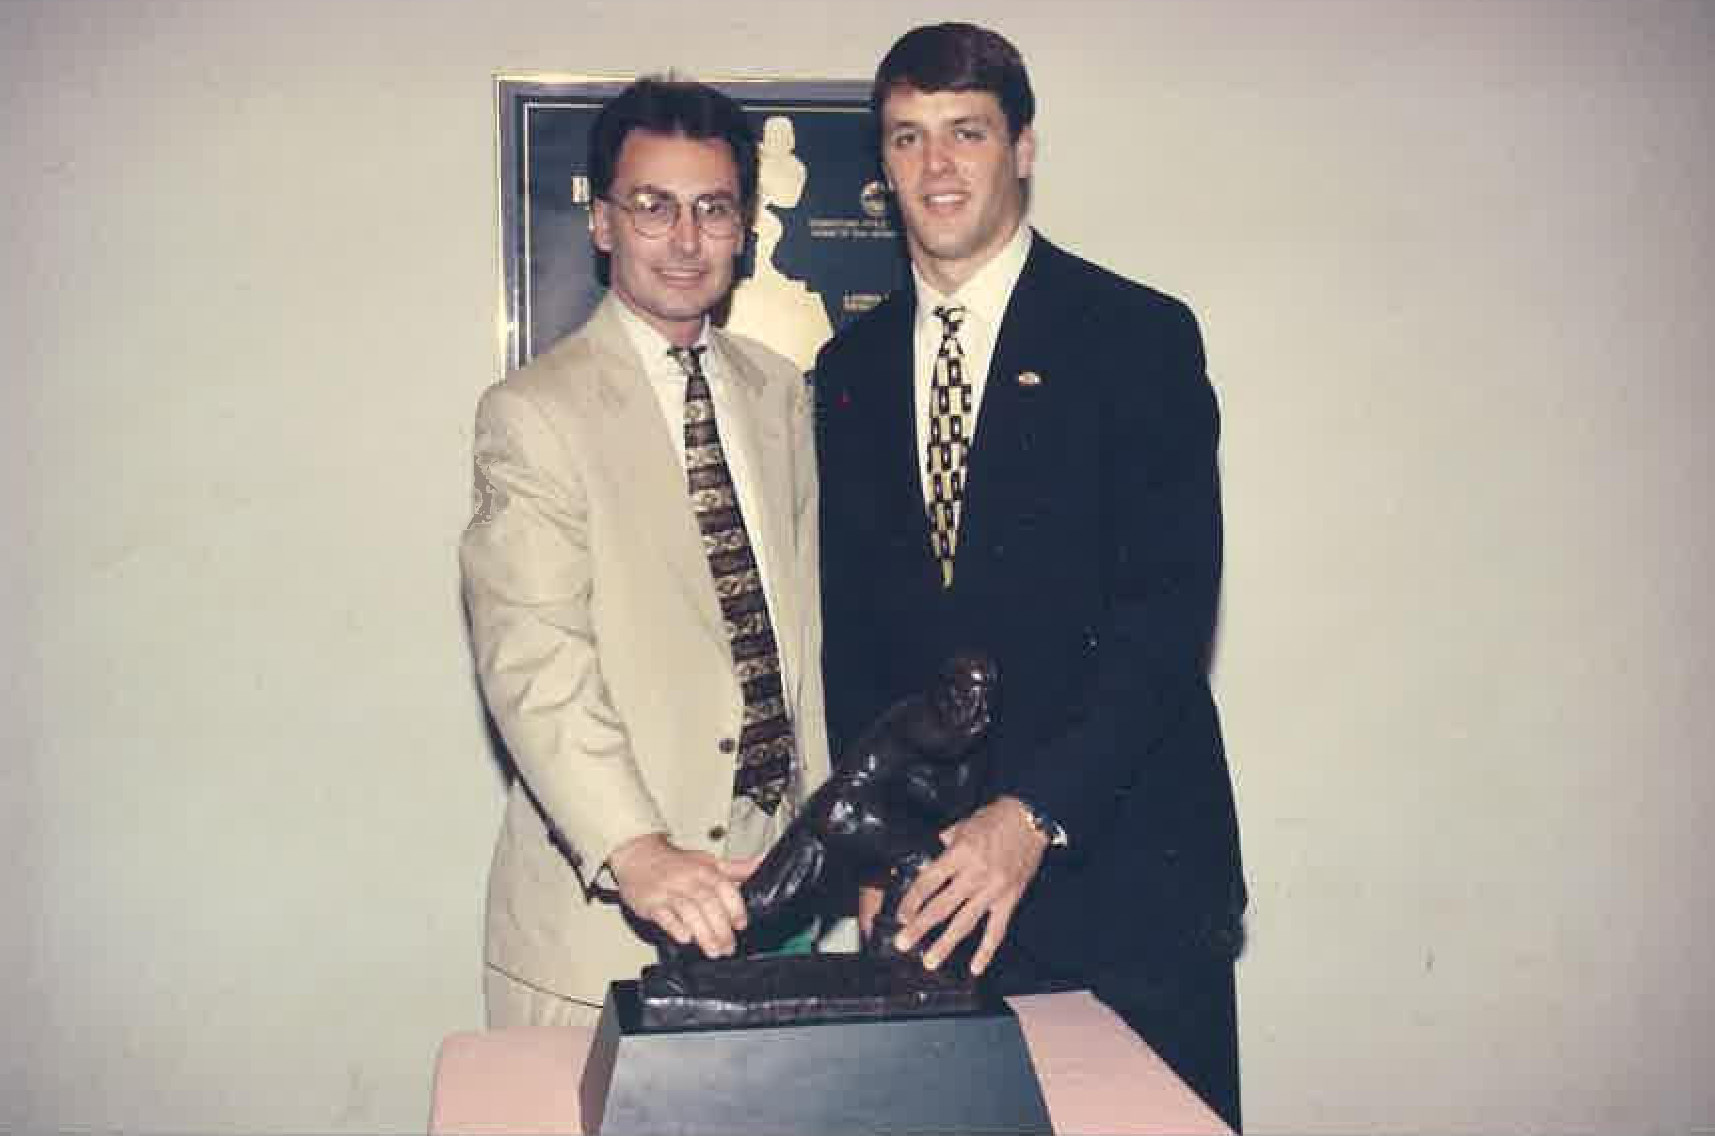 Mark Brand and Jake Plummer with Heisman trophy in 1996